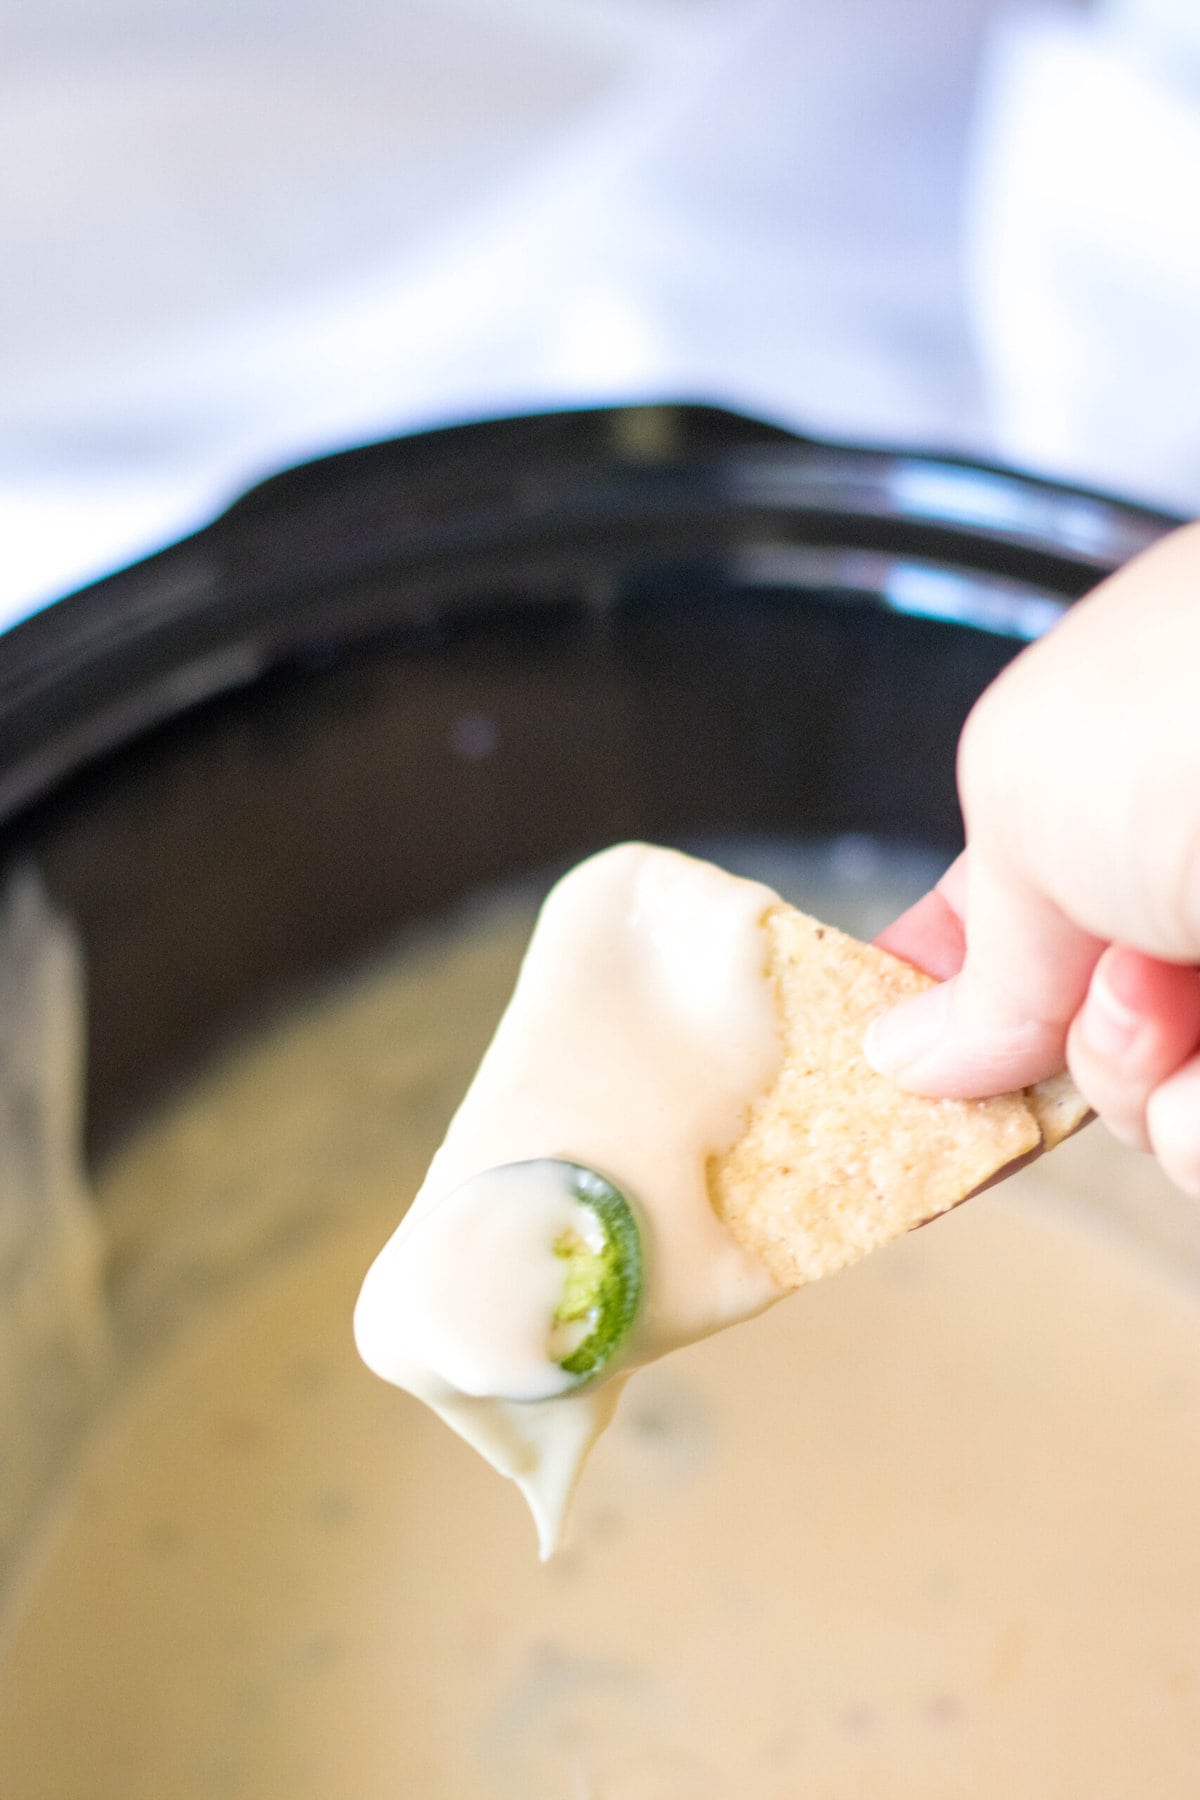 Dipping a chip in the Crockpot Queso.